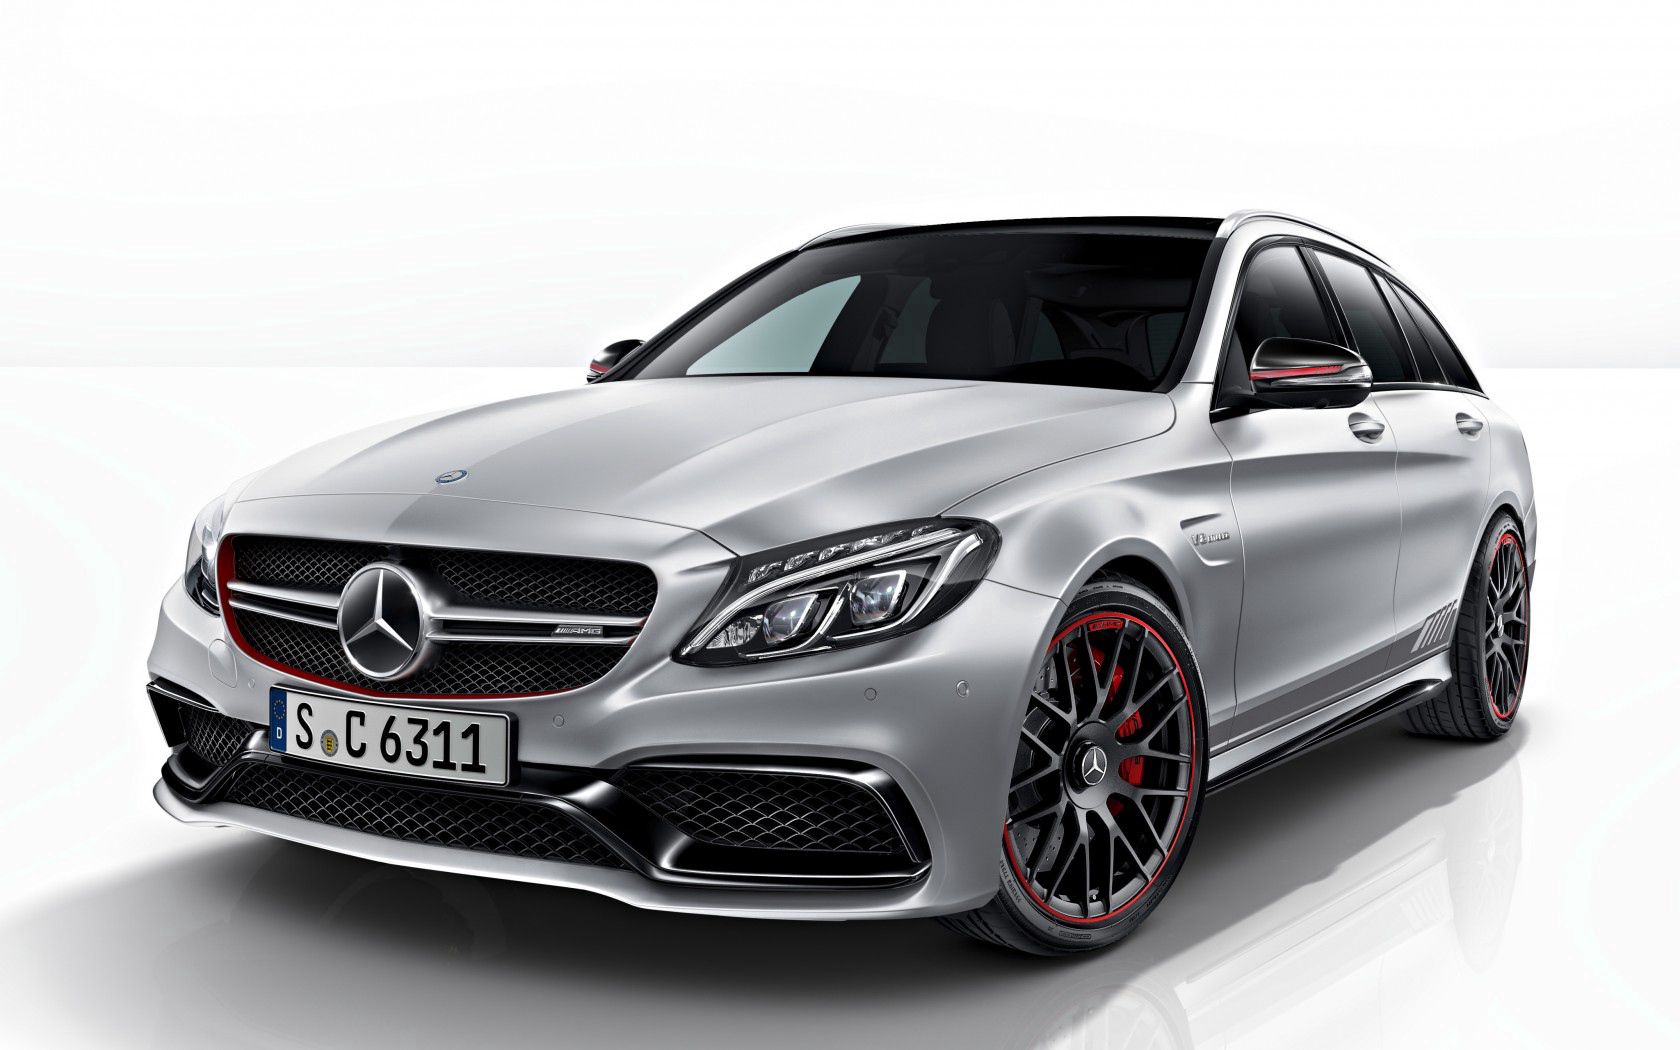 Free HD auto, cars, 2014, side view, amg, mercedes, c63, s, estate edition, s205